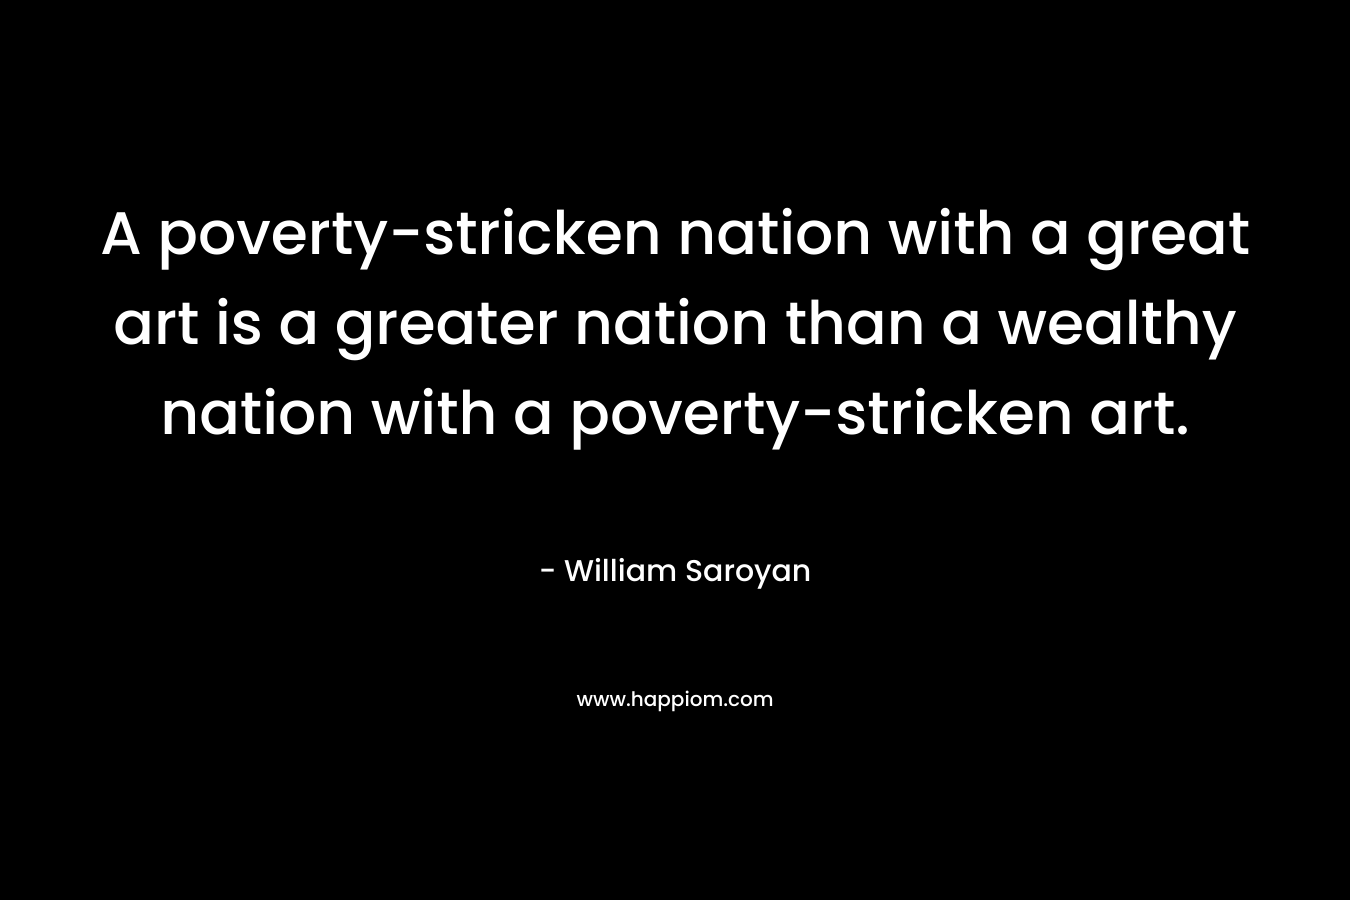 A poverty-stricken nation with a great art is a greater nation than a wealthy nation with a poverty-stricken art.